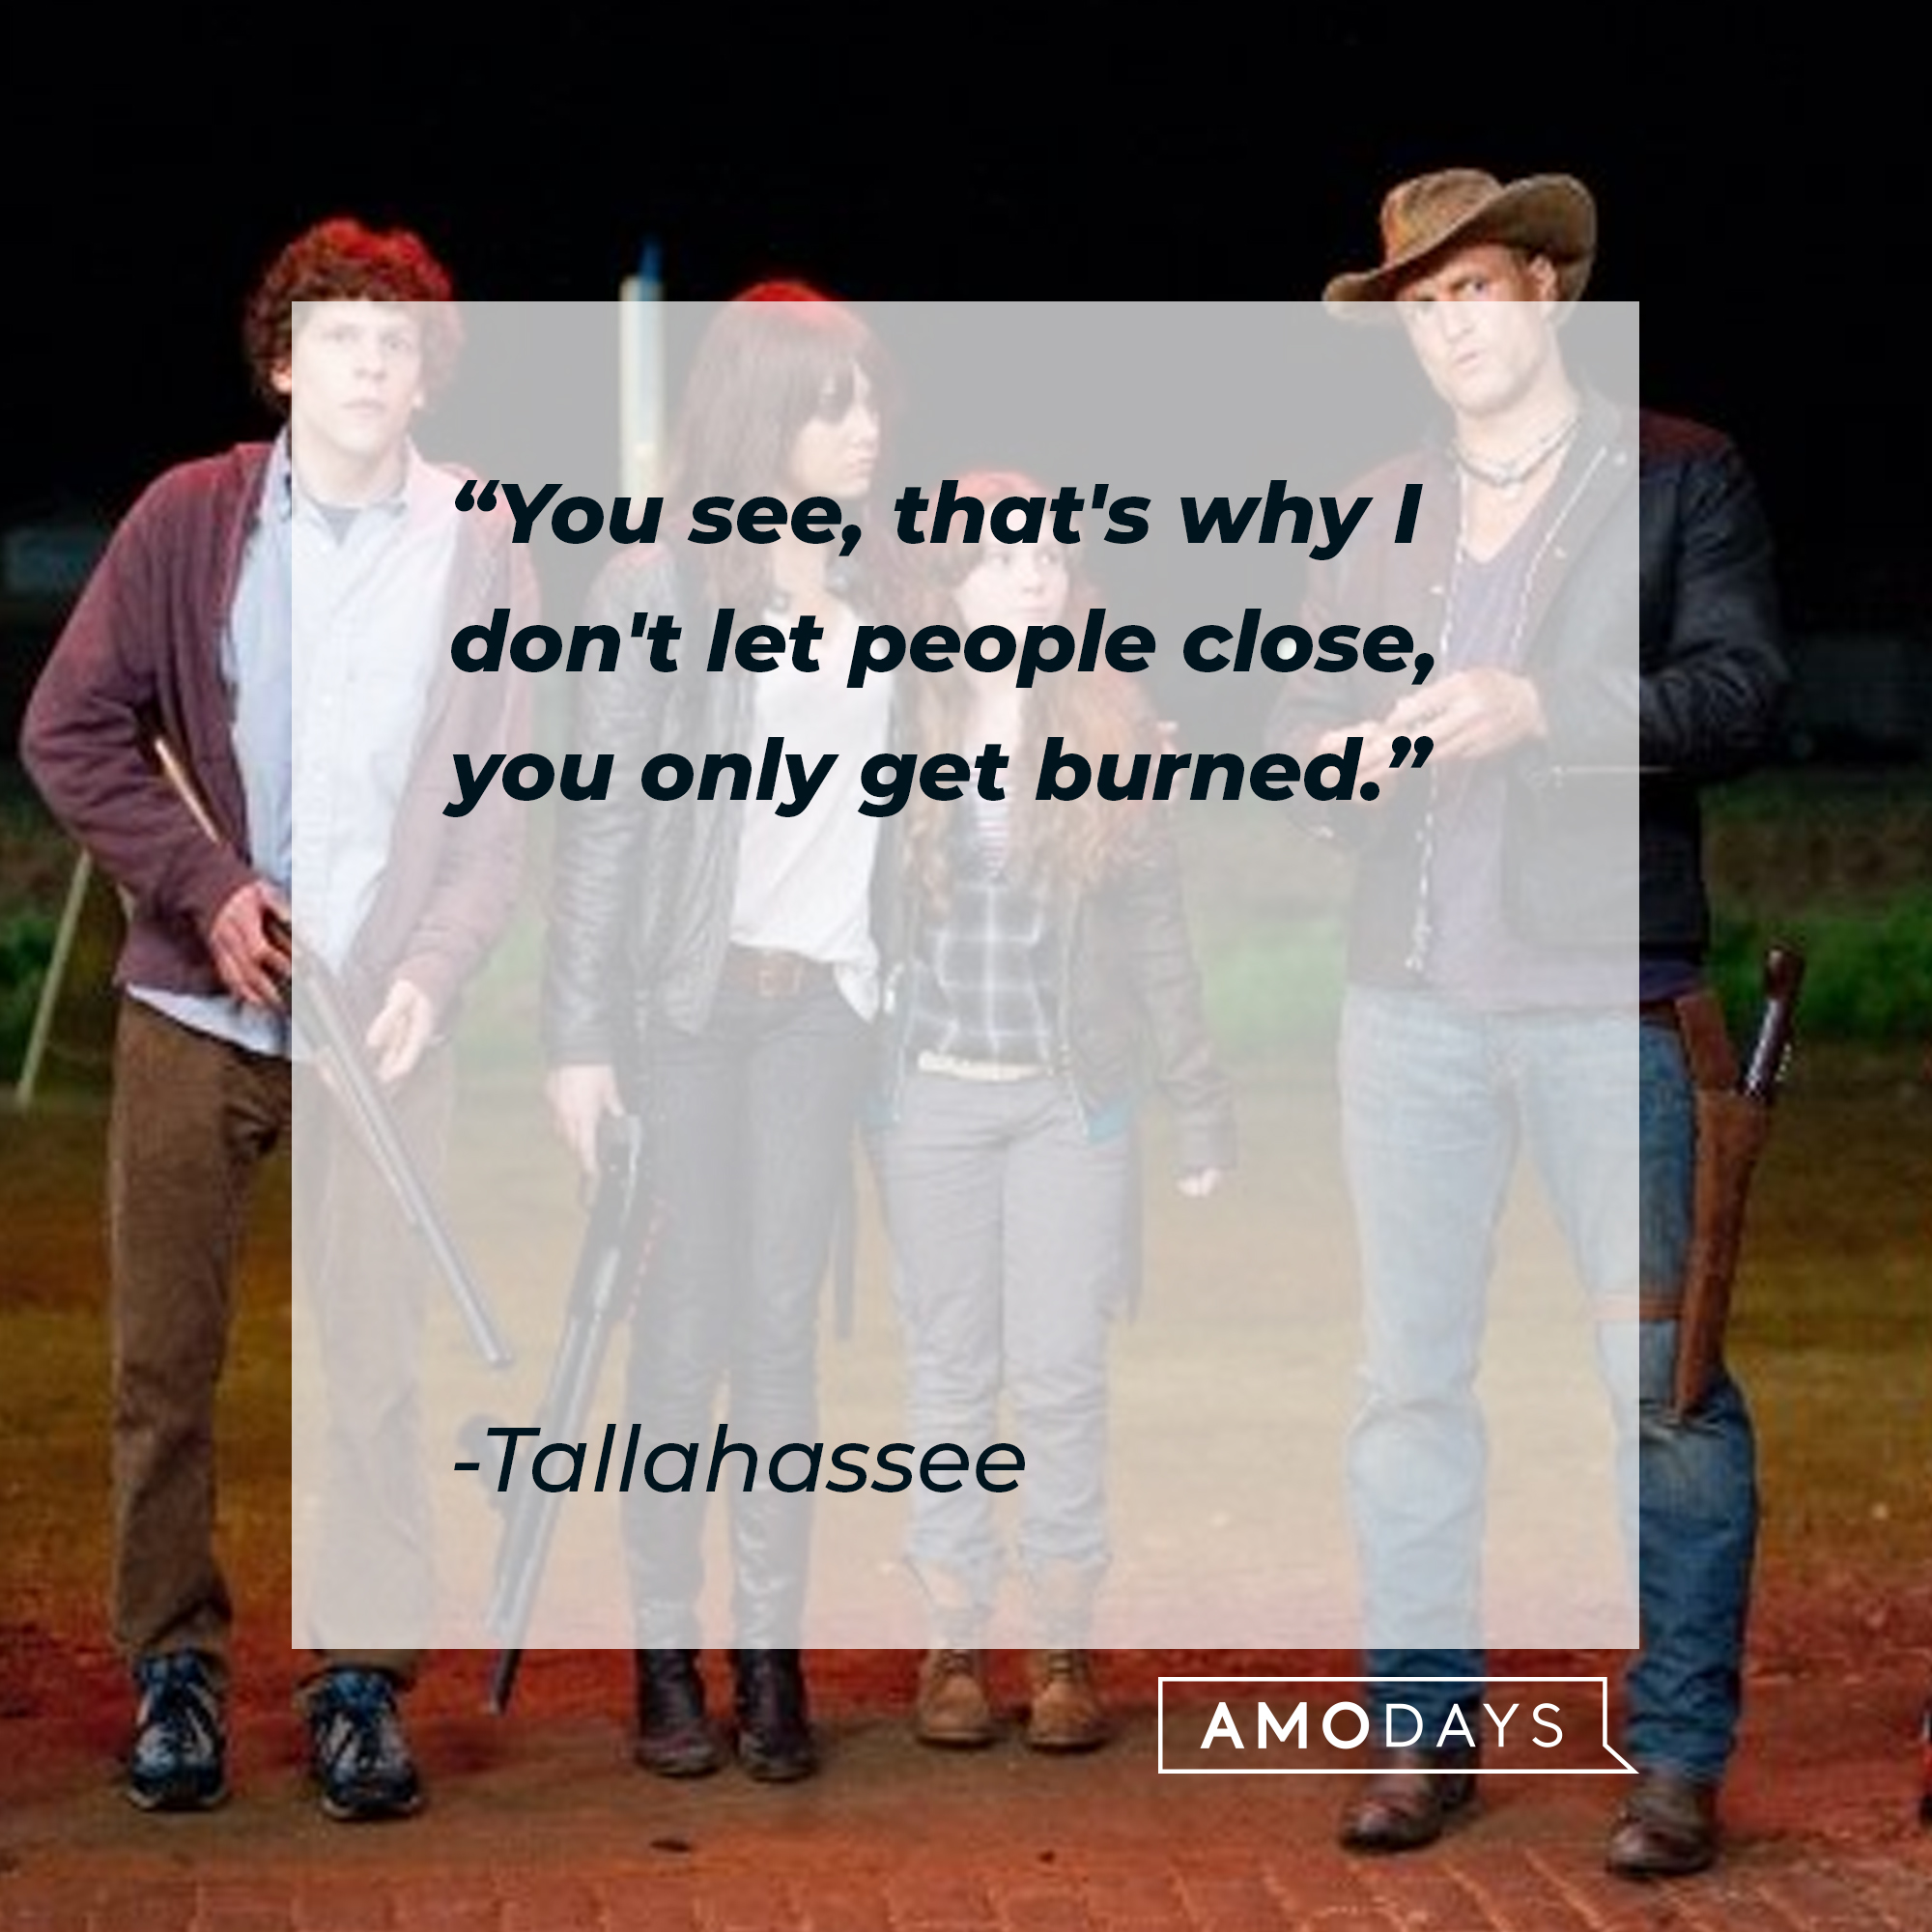 Tallahassee's quote: "You see, that's why I don't let people close, you only get burned." | Source: Facebook.com/Zombieland